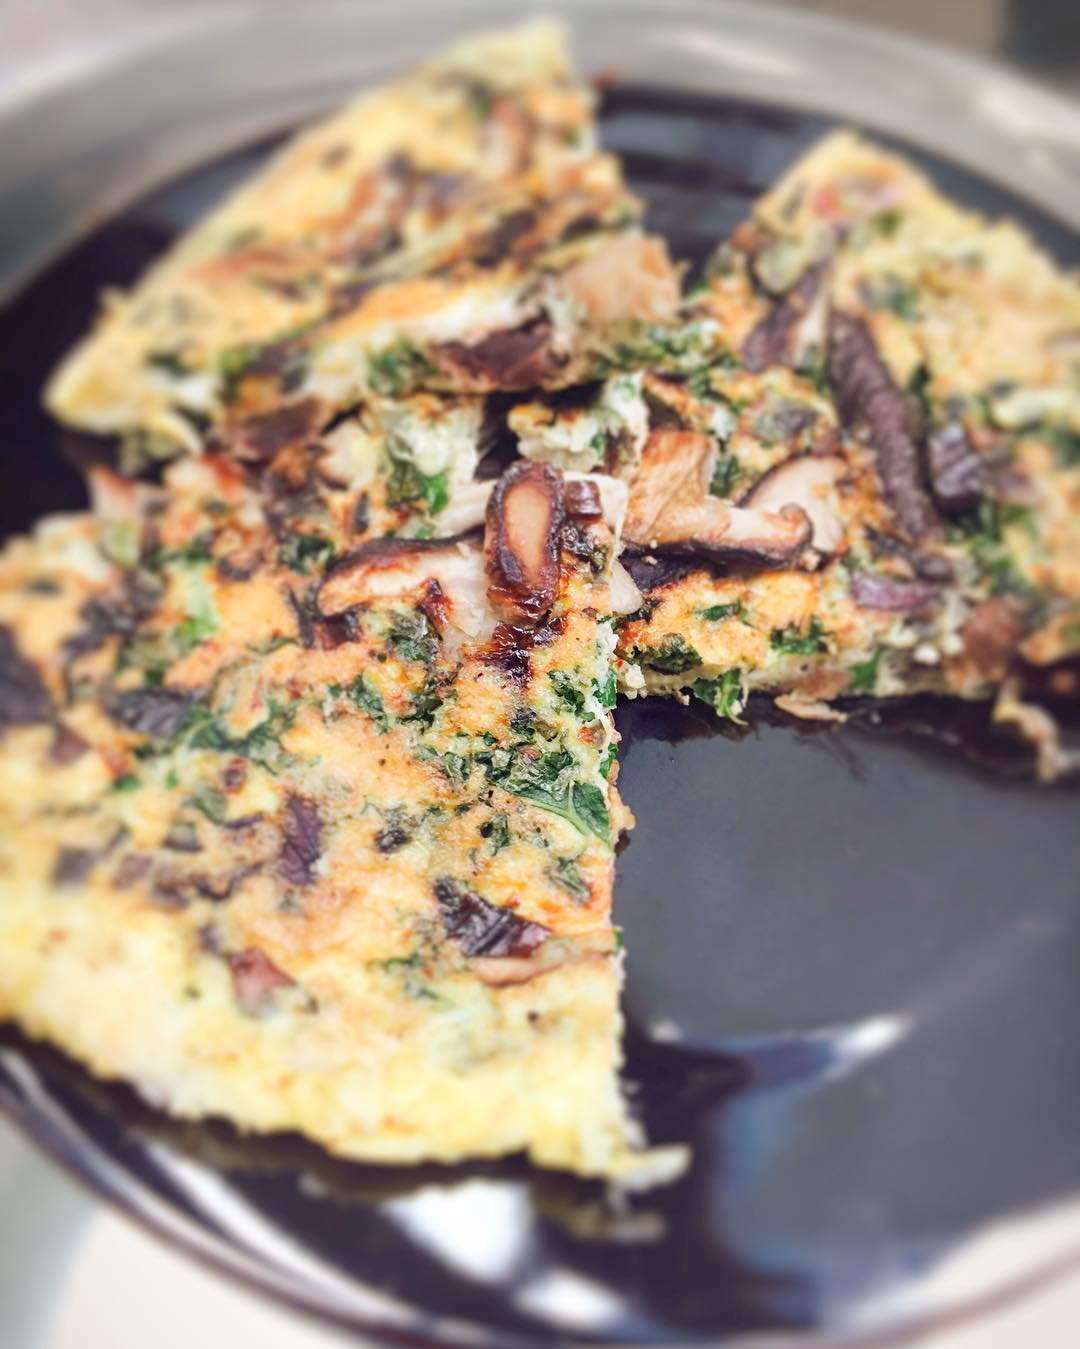 Superfood Omelette Lunch